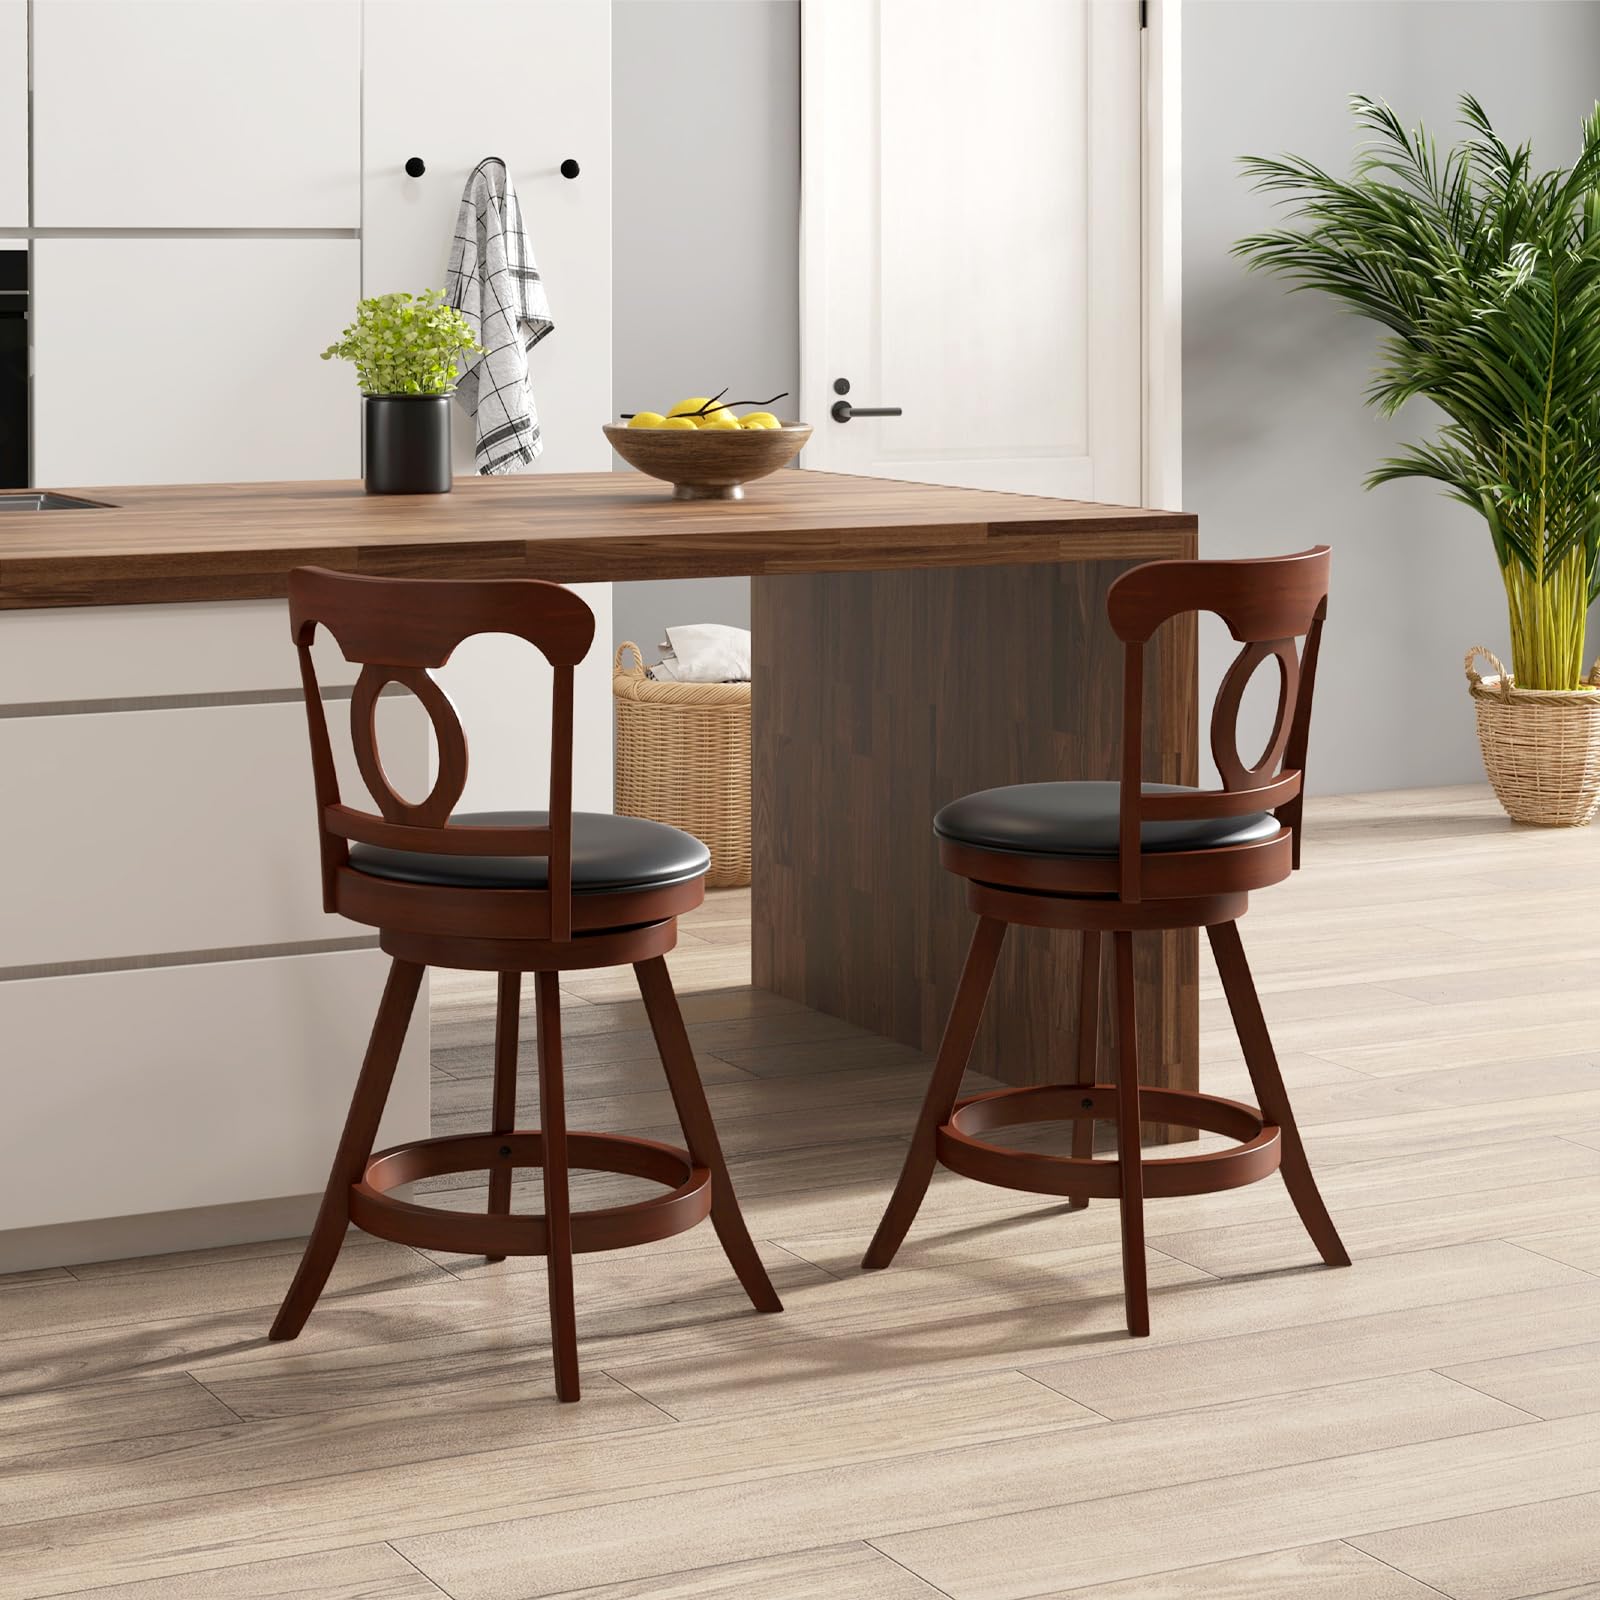 Giantex Swivel Bar Stools Set of 2, 24" Counter Height Barstools with Back, Solid Rubber Wood Frame